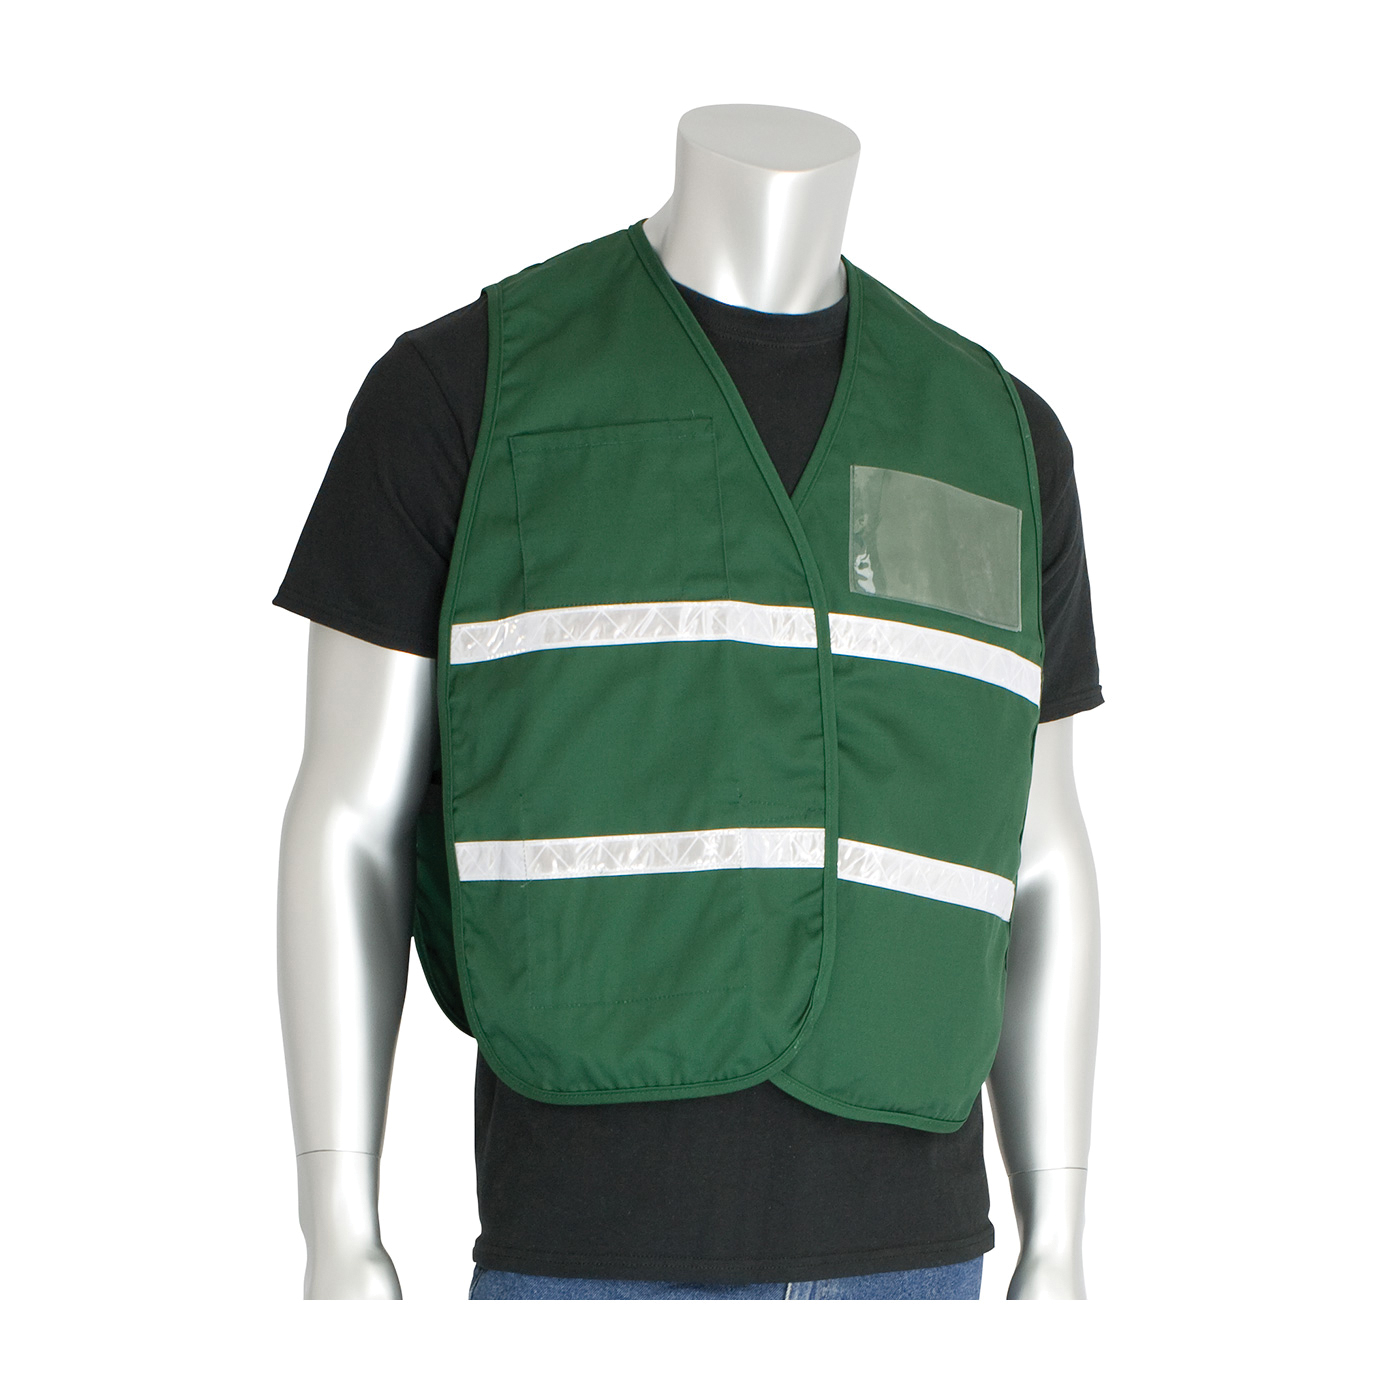 PIP® 300-2514/M-XL 300-2500 Non-ANSI Incident Command Vest, M/XL, Forest Green, 35% Cotton/65% Polyester, Hook and Loop Closure, 4 Pockets